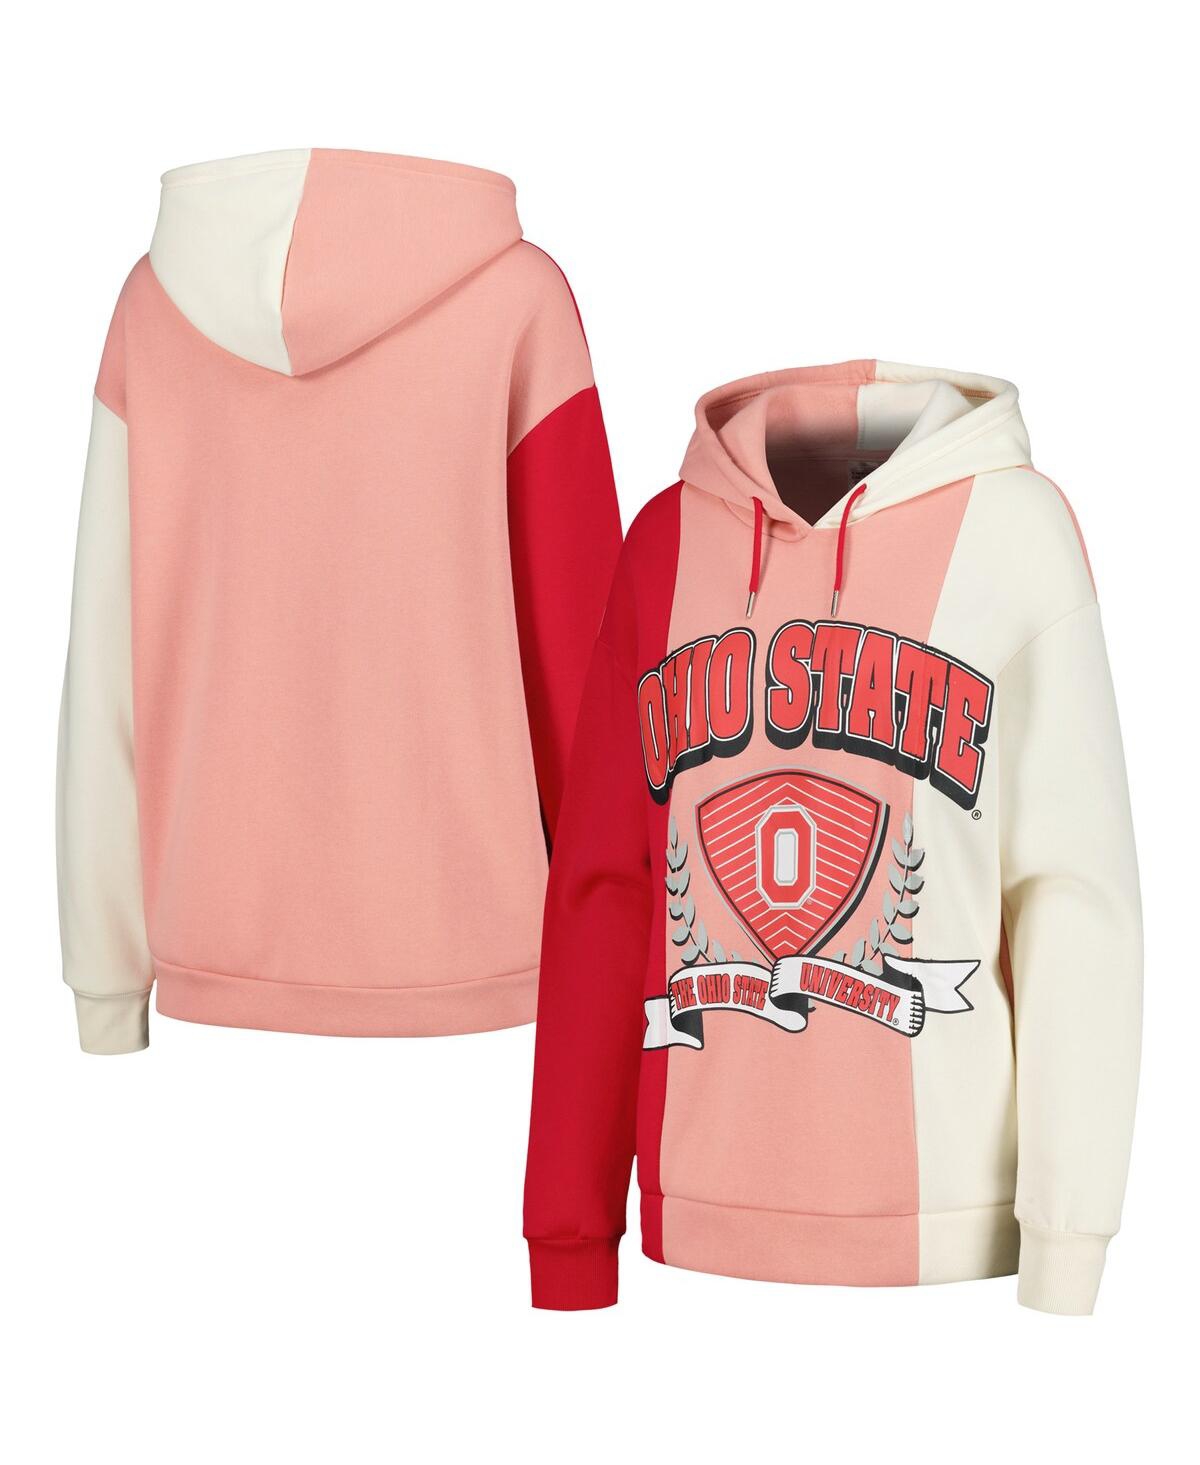 Women's Gameday Couture Scarlet Ohio State Buckeyes Hall of Fame Colorblock Pullover Hoodie - Scarlet